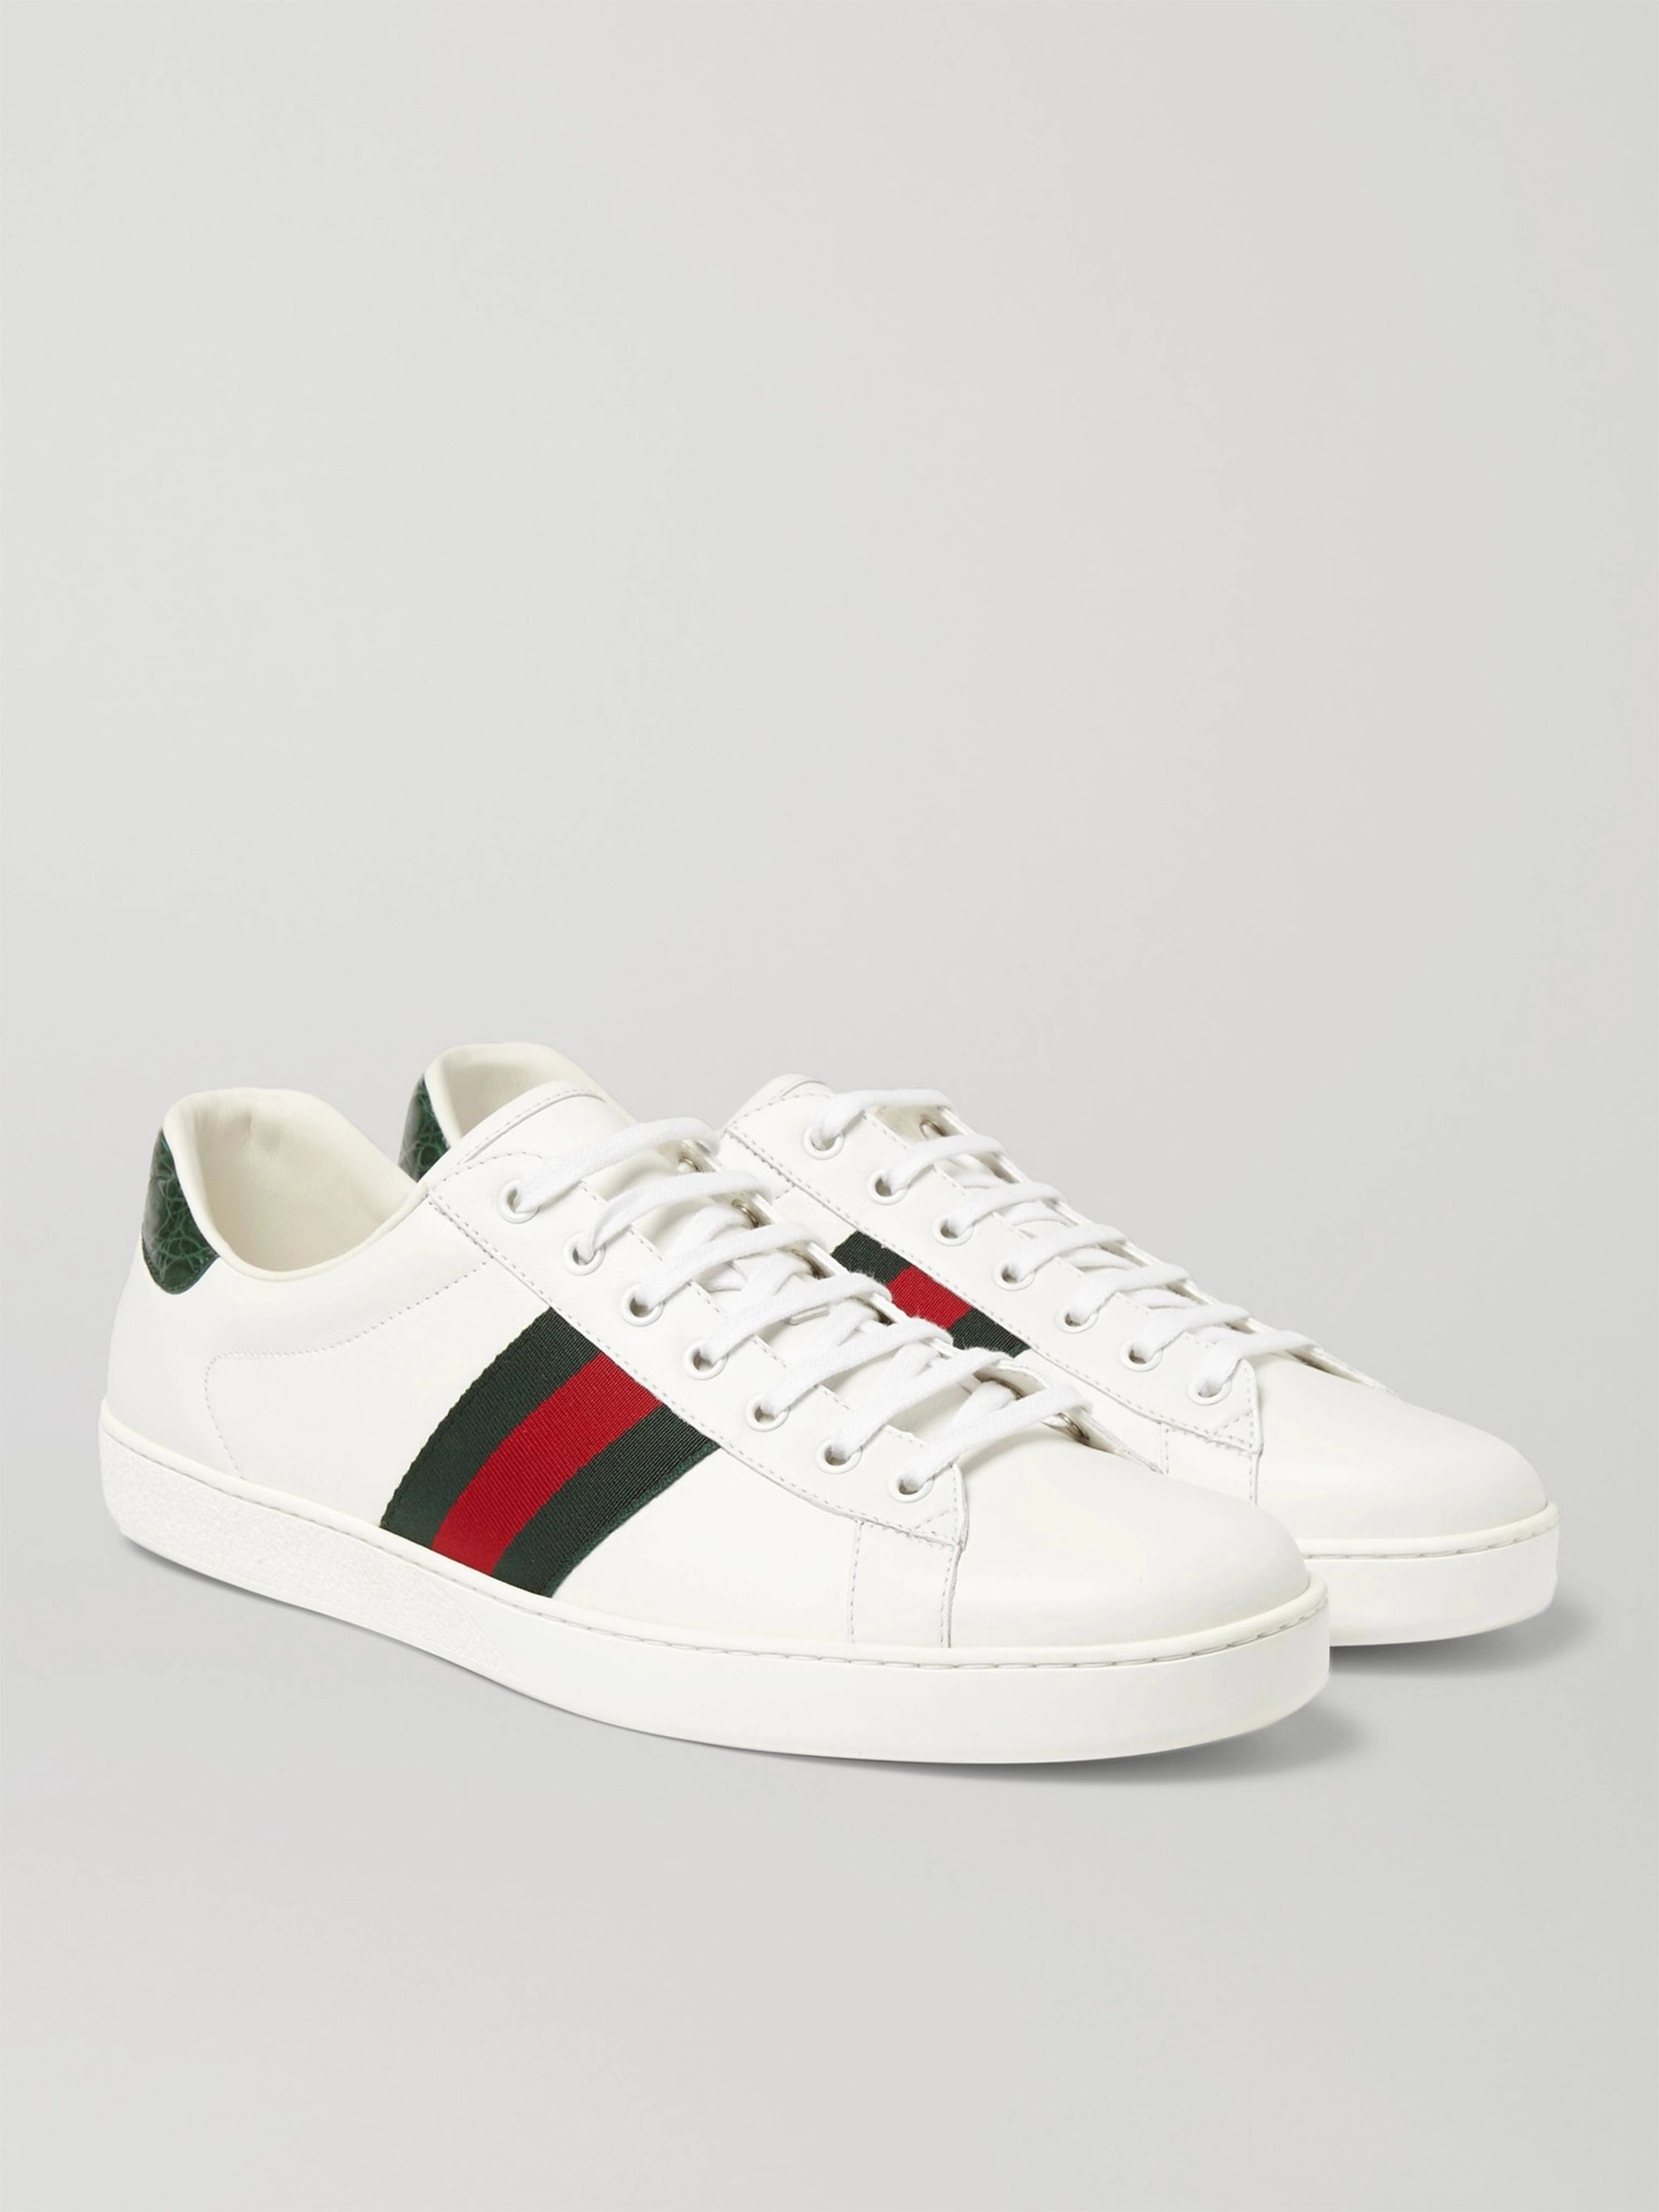 shoes similar to gucci ace